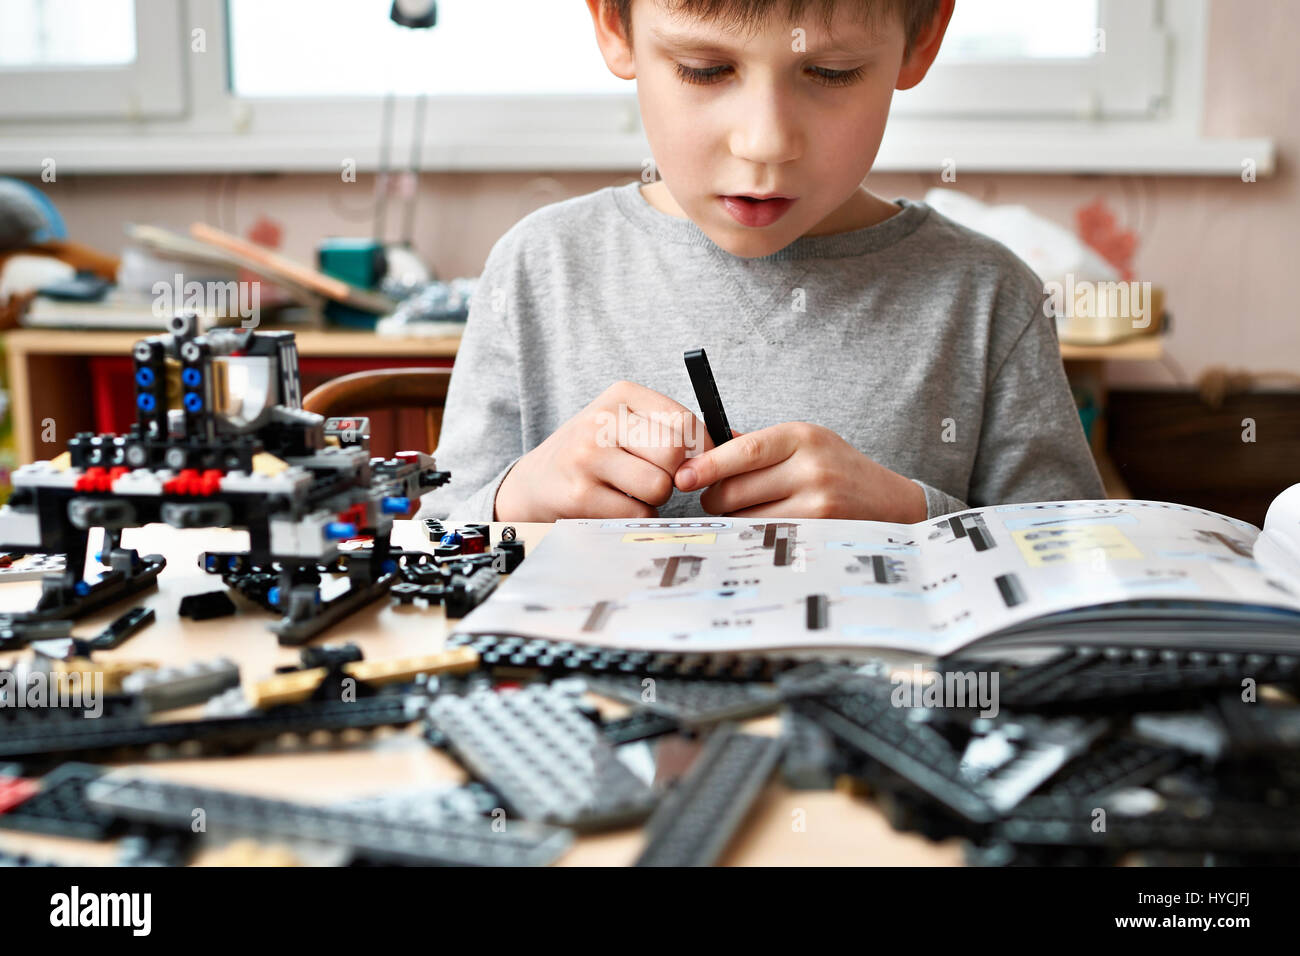 Little boy collects the children's plastic construction toys Stock Photo